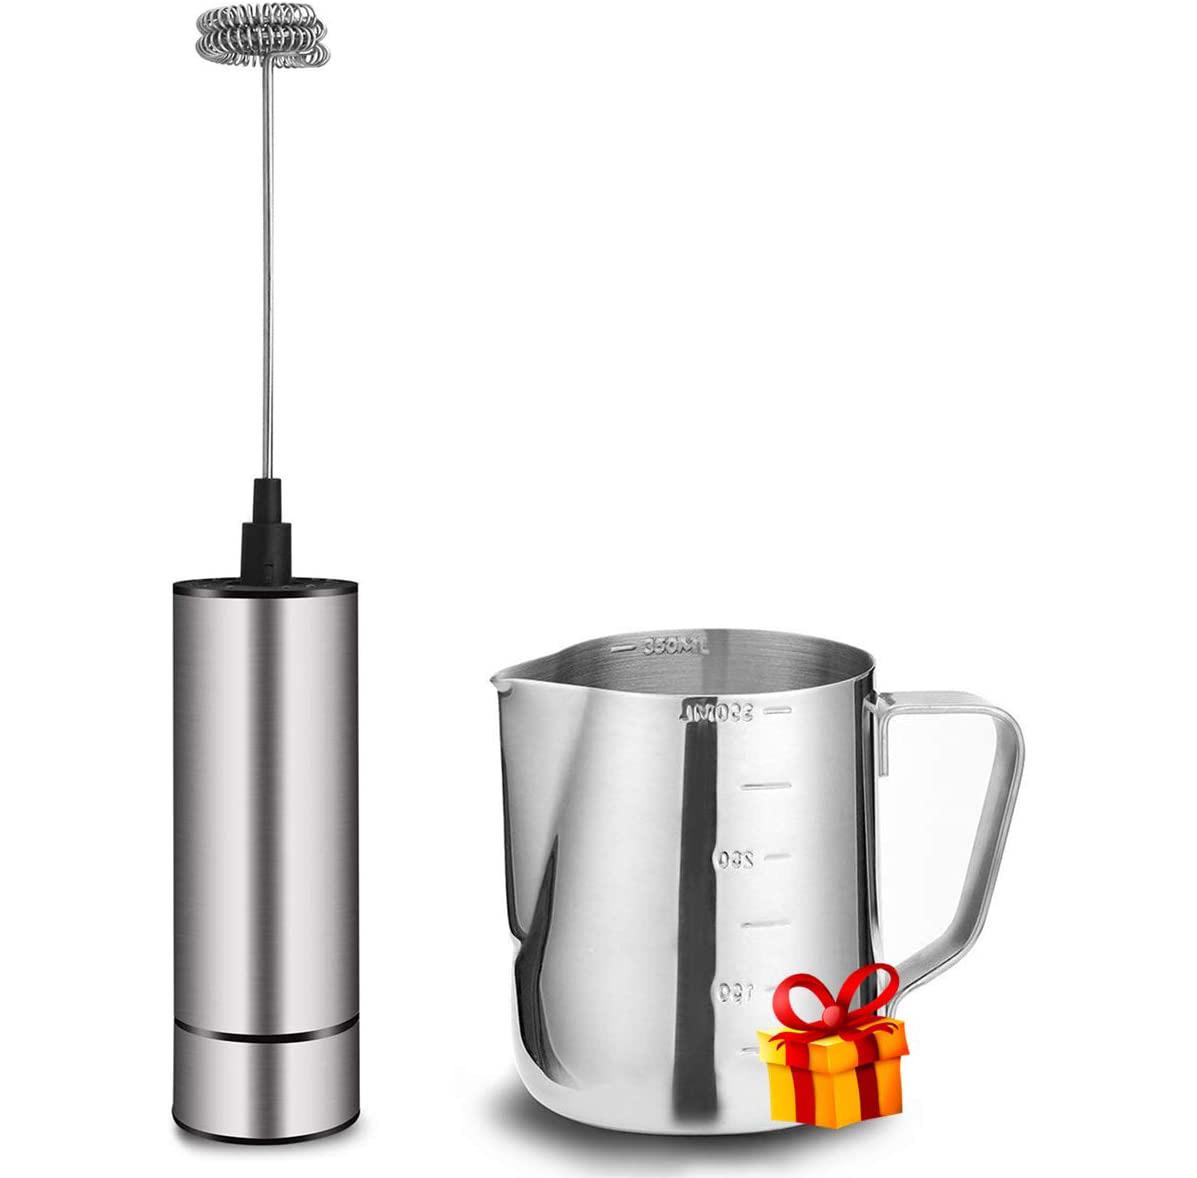 Milk Frother for $7.99